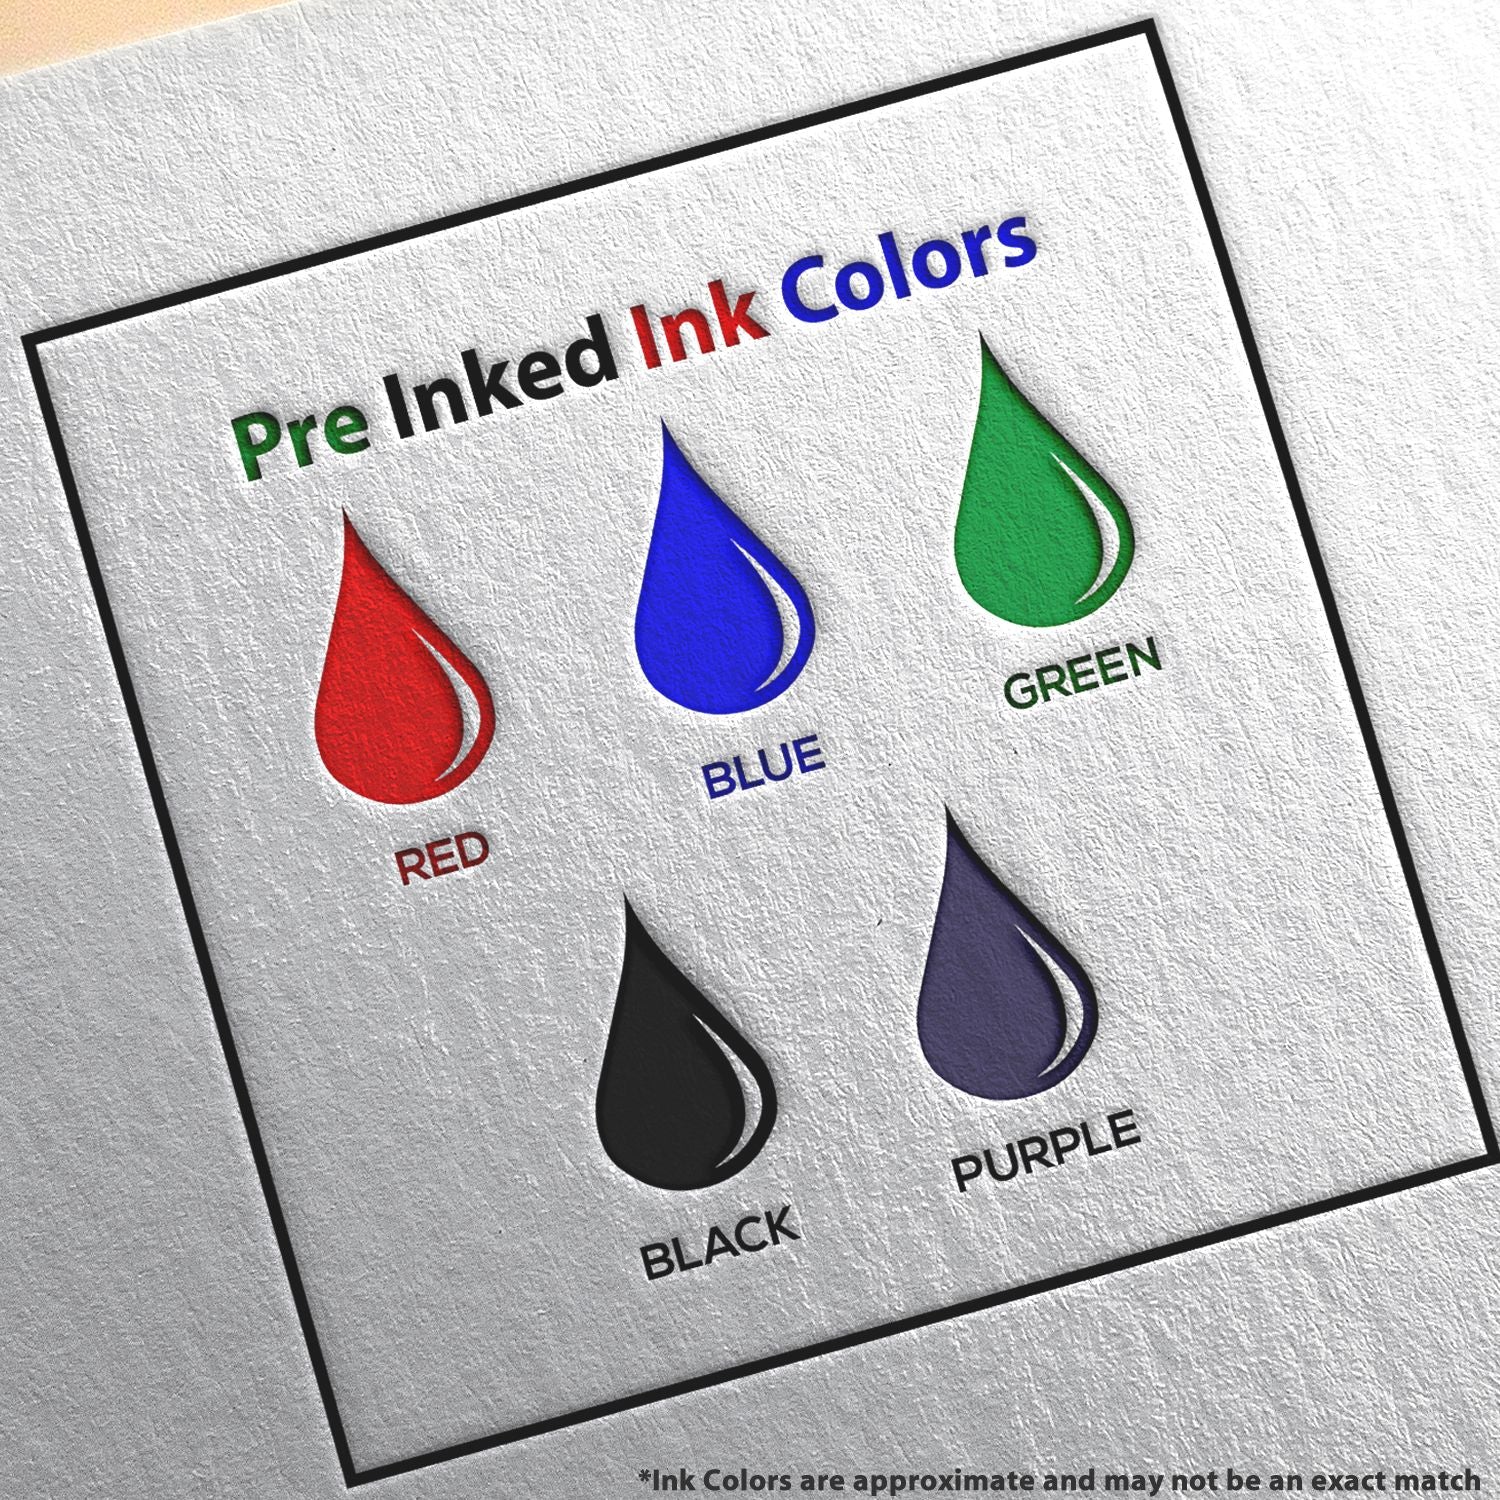 A picture showing the different ink colors or hues available for the Premium MaxLight Pre-Inked Connecticut Engineering Stamp product.